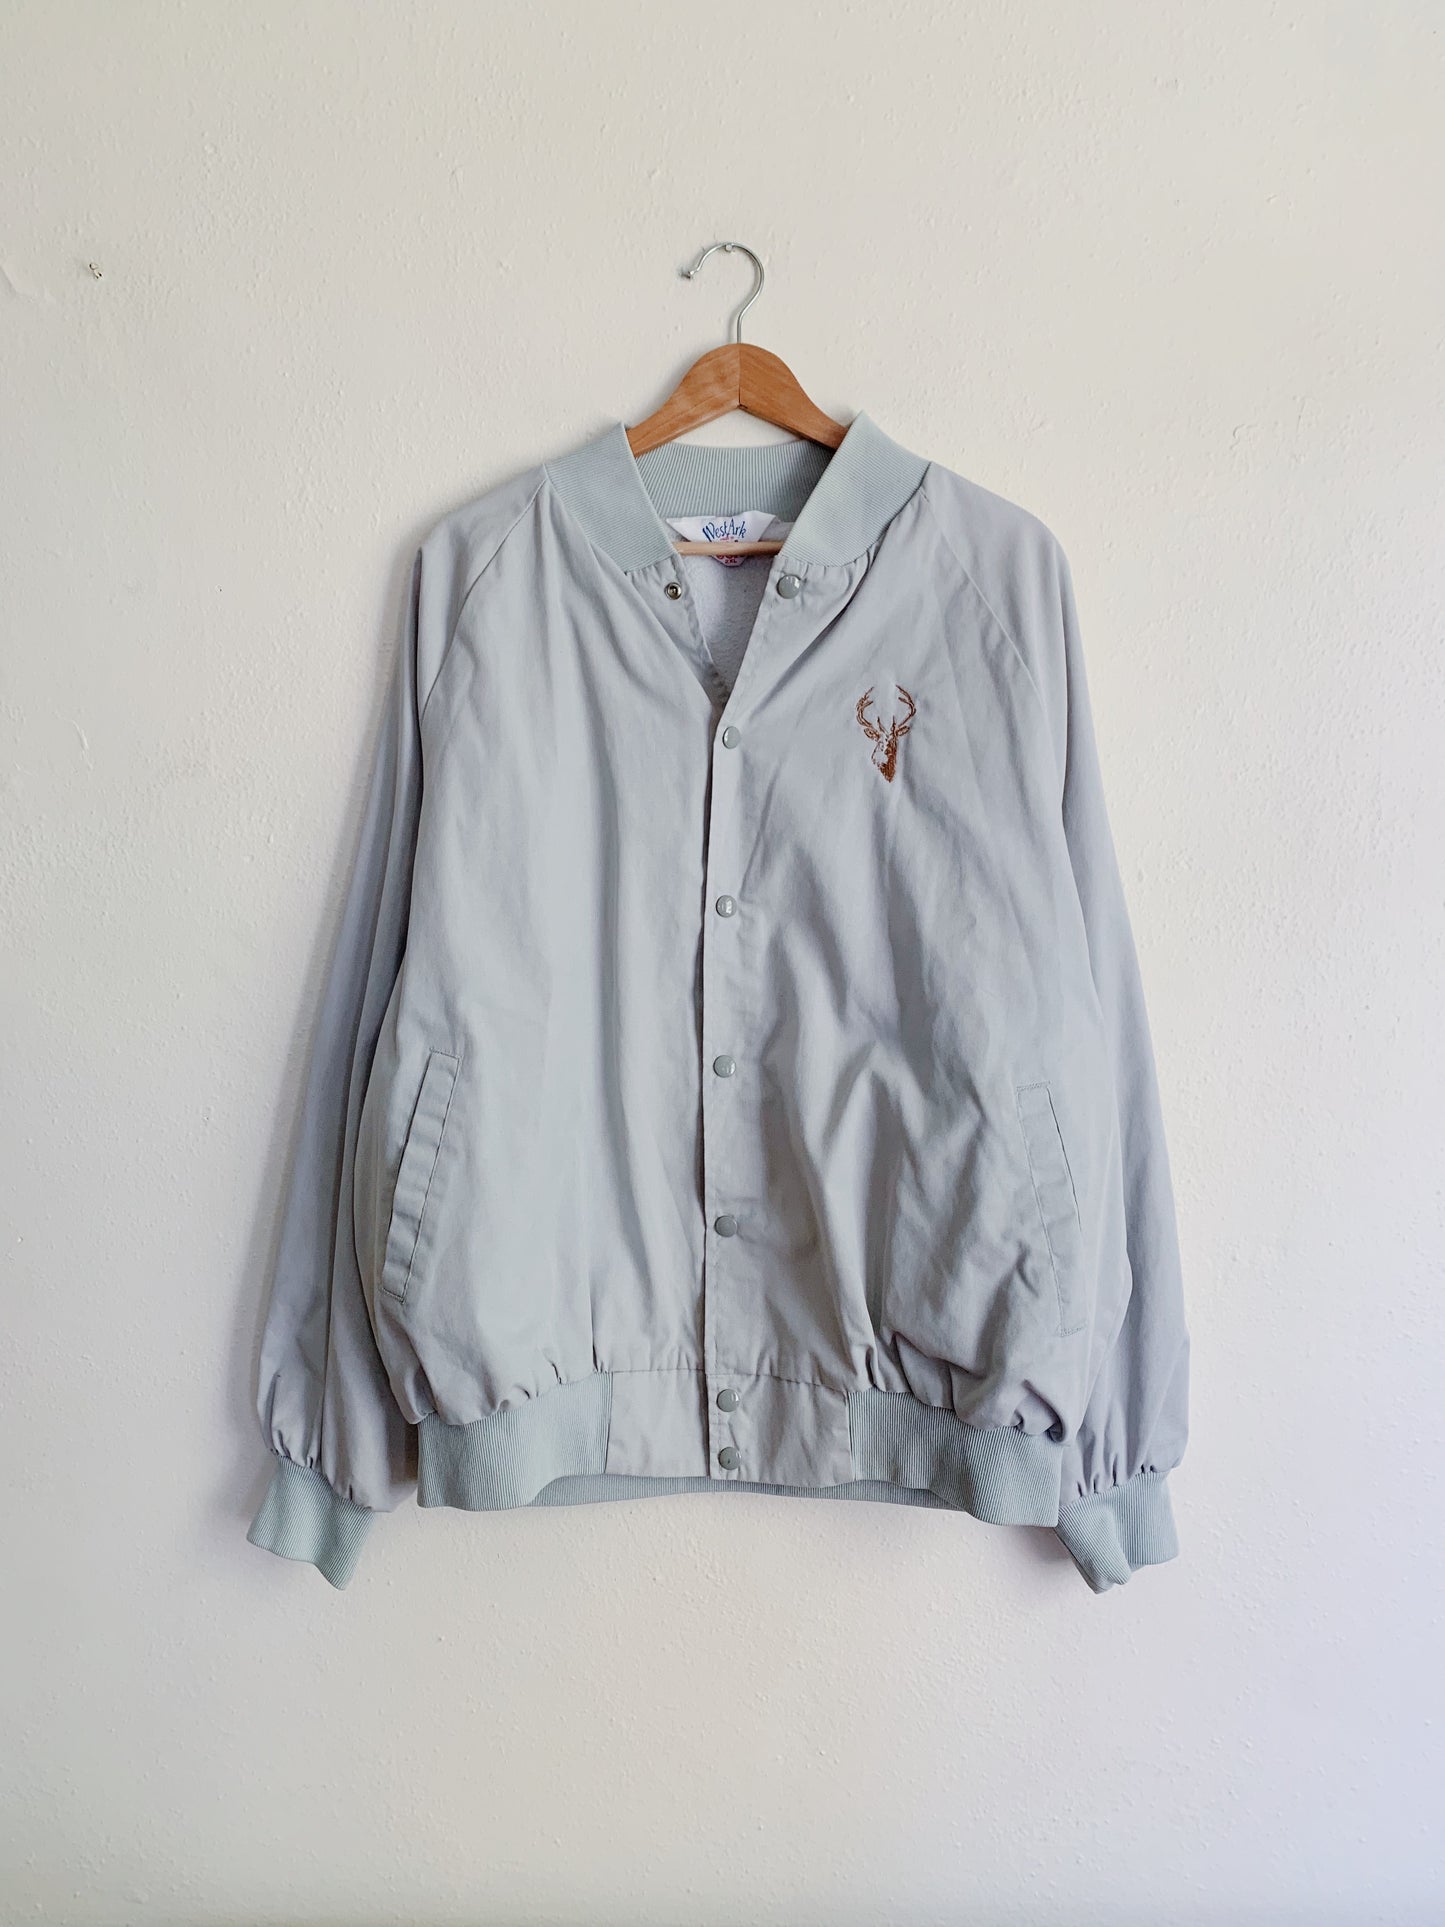 Vintage Jacket with Embroidered Deer (XXL)